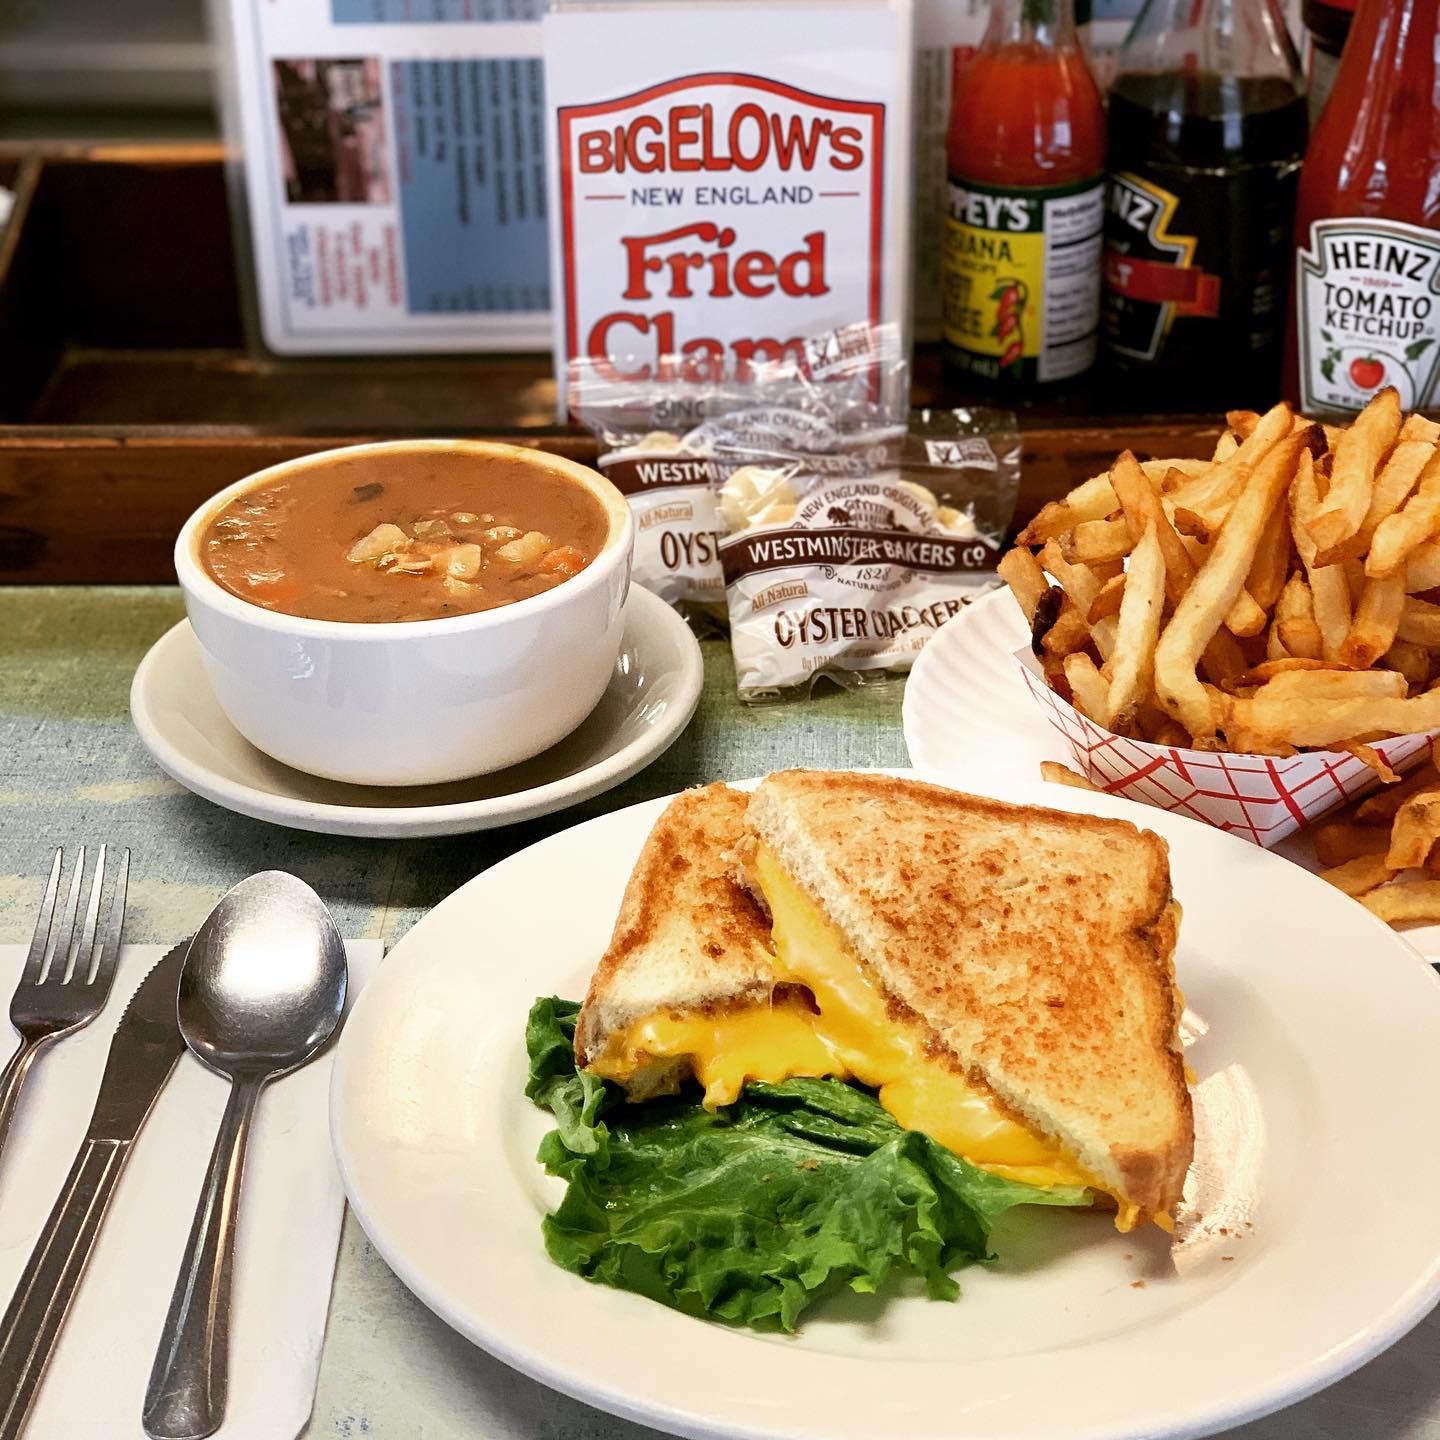 Bowl of clam chowder, grilled cheese sandwich, and basket of fries. Photo by Instagram user @bigelowsfriedclams